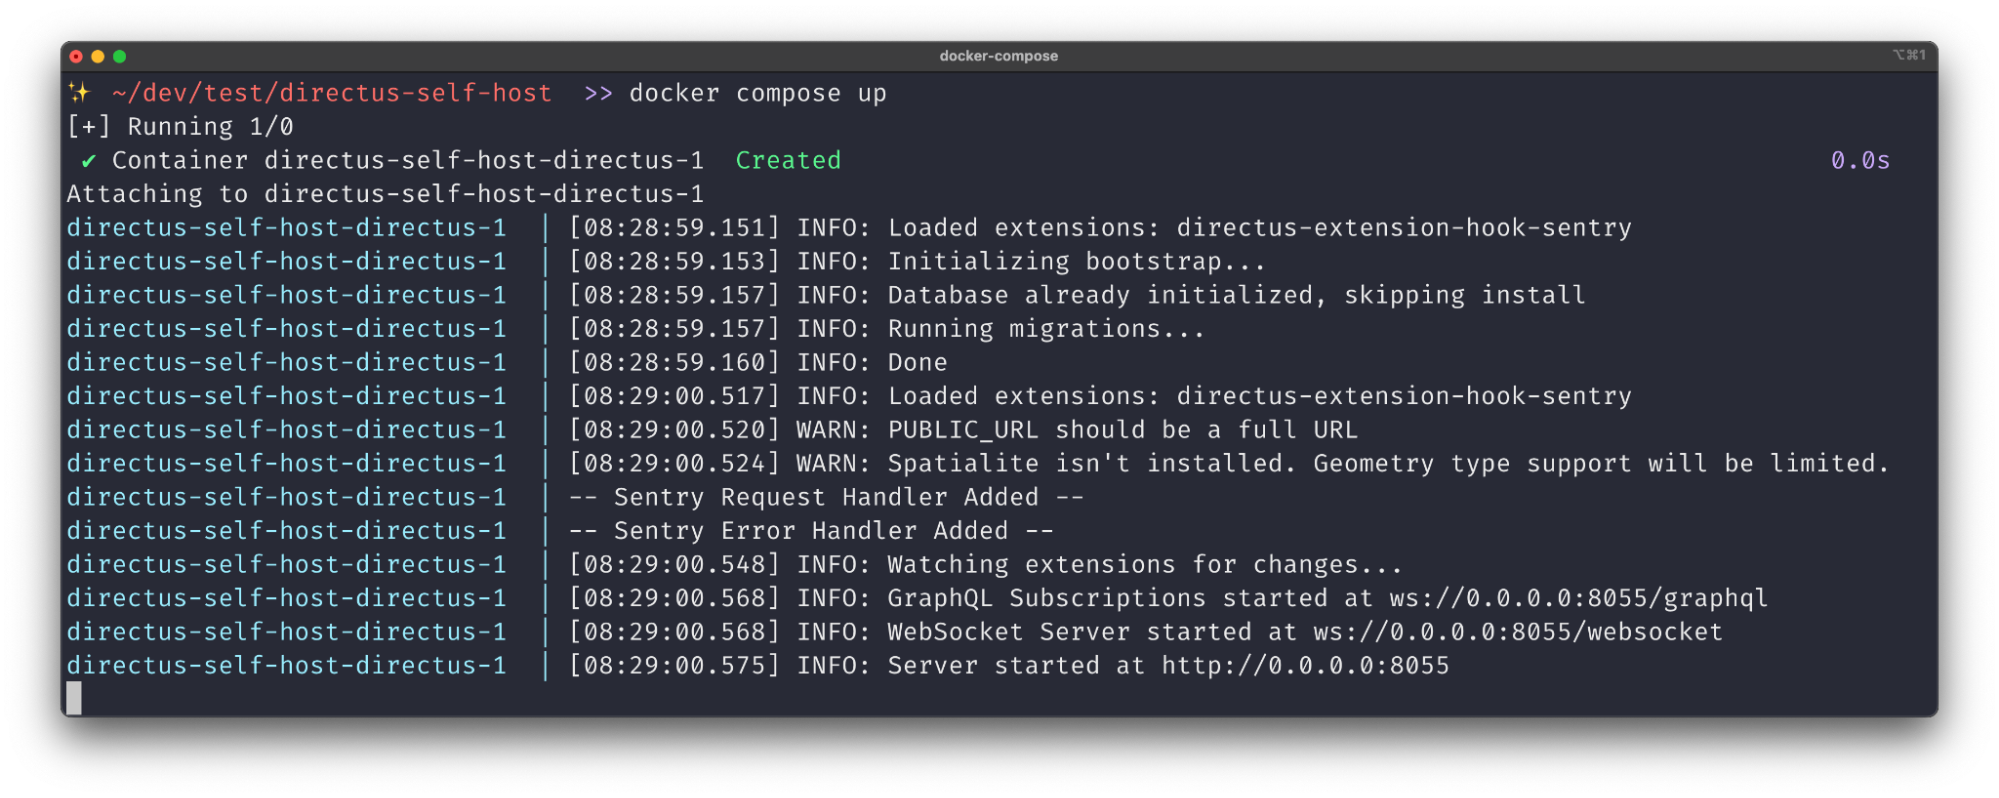 A terminal showing the Sentry Request Handler Added log and the Sentry Error Handler Added log, amidst the Docker logs.